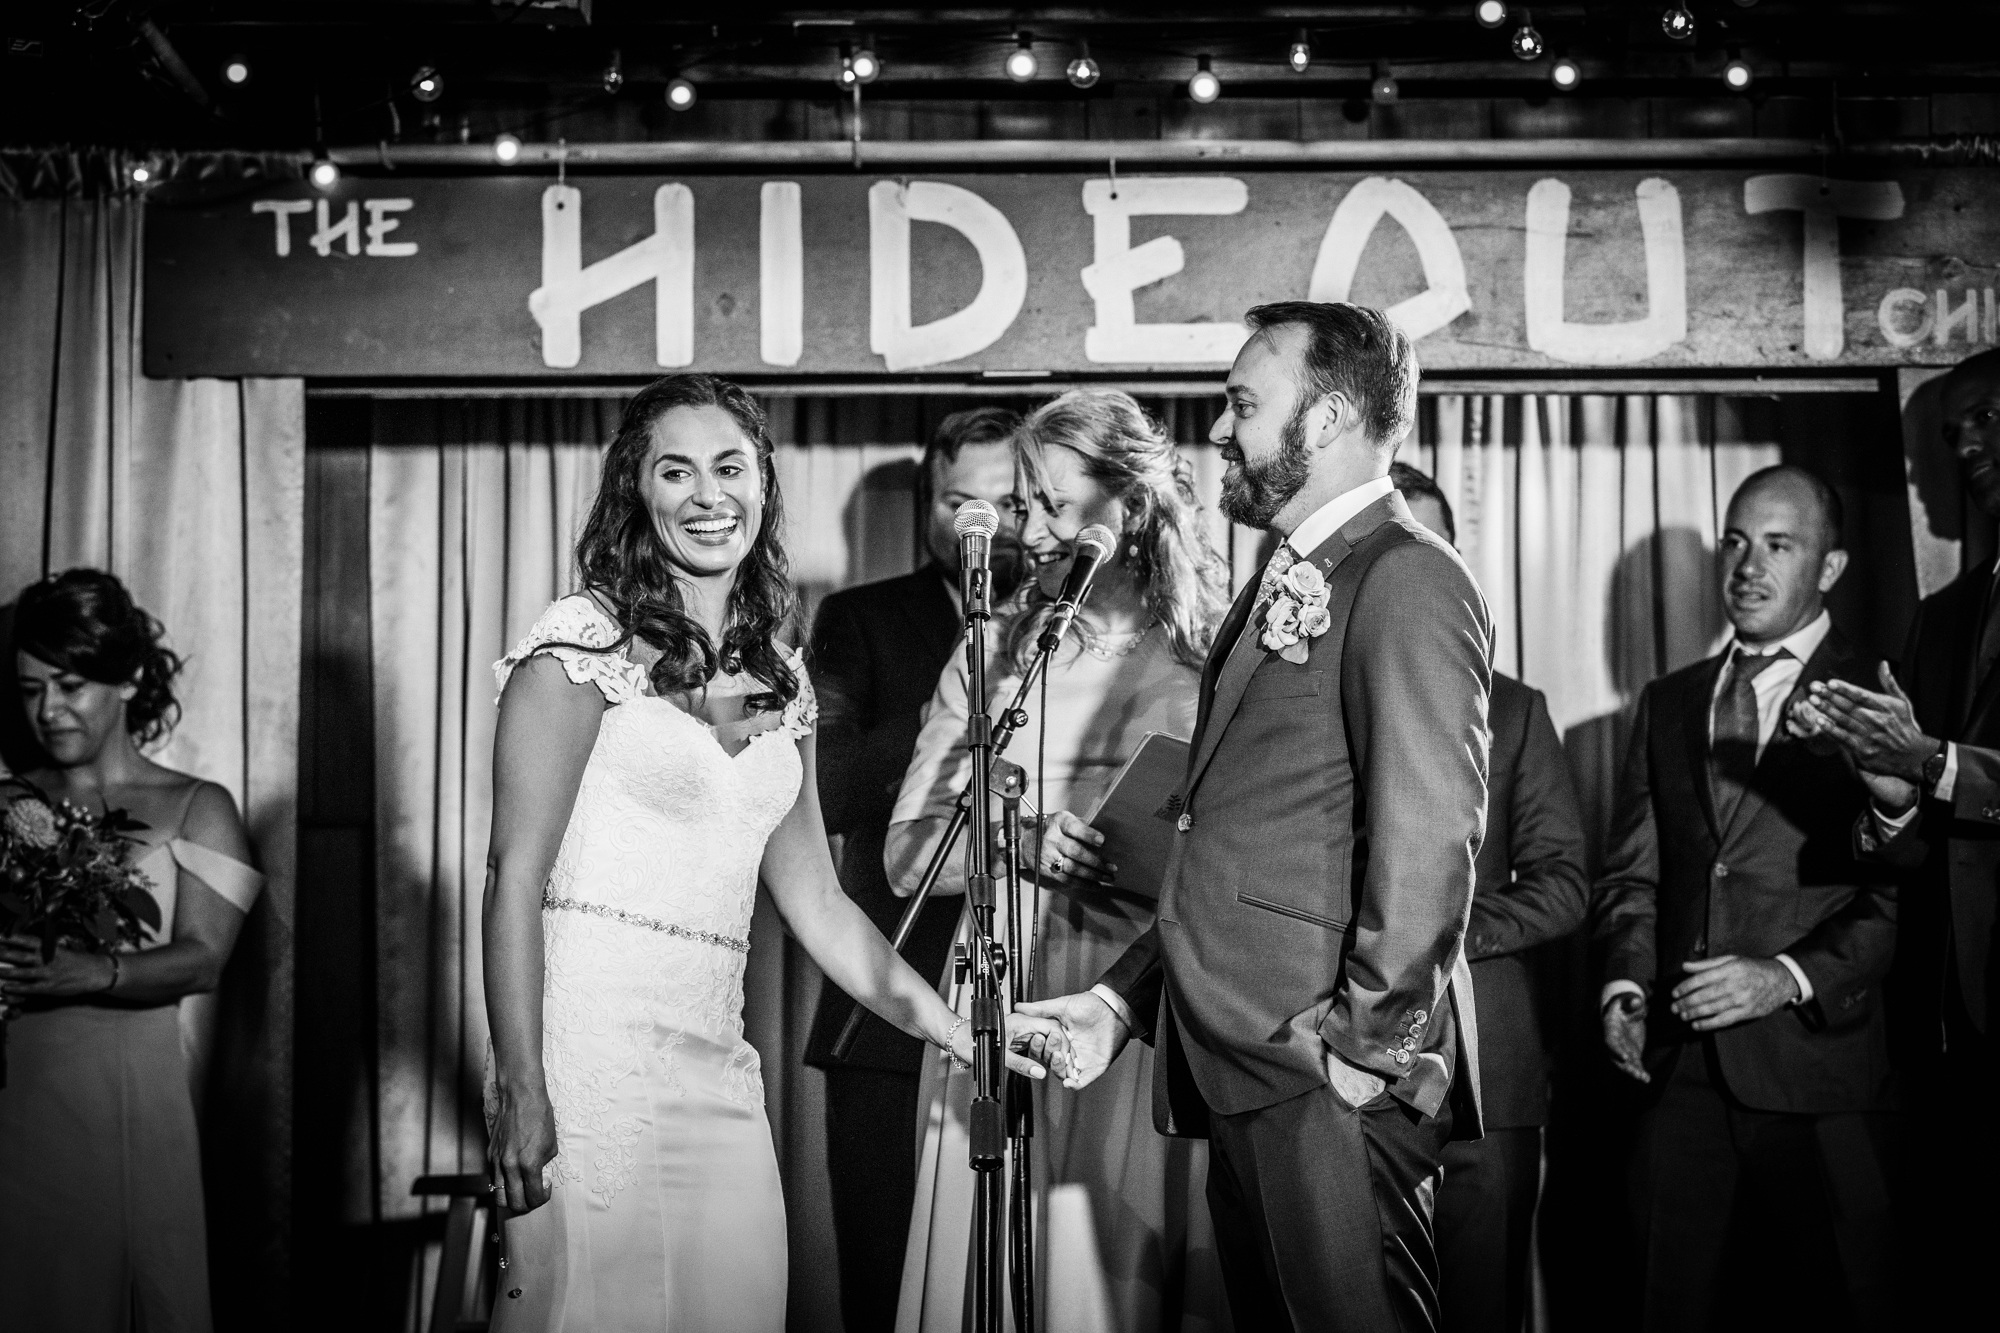 A couple laughs together during a Hideout Chicago wedding ceremony